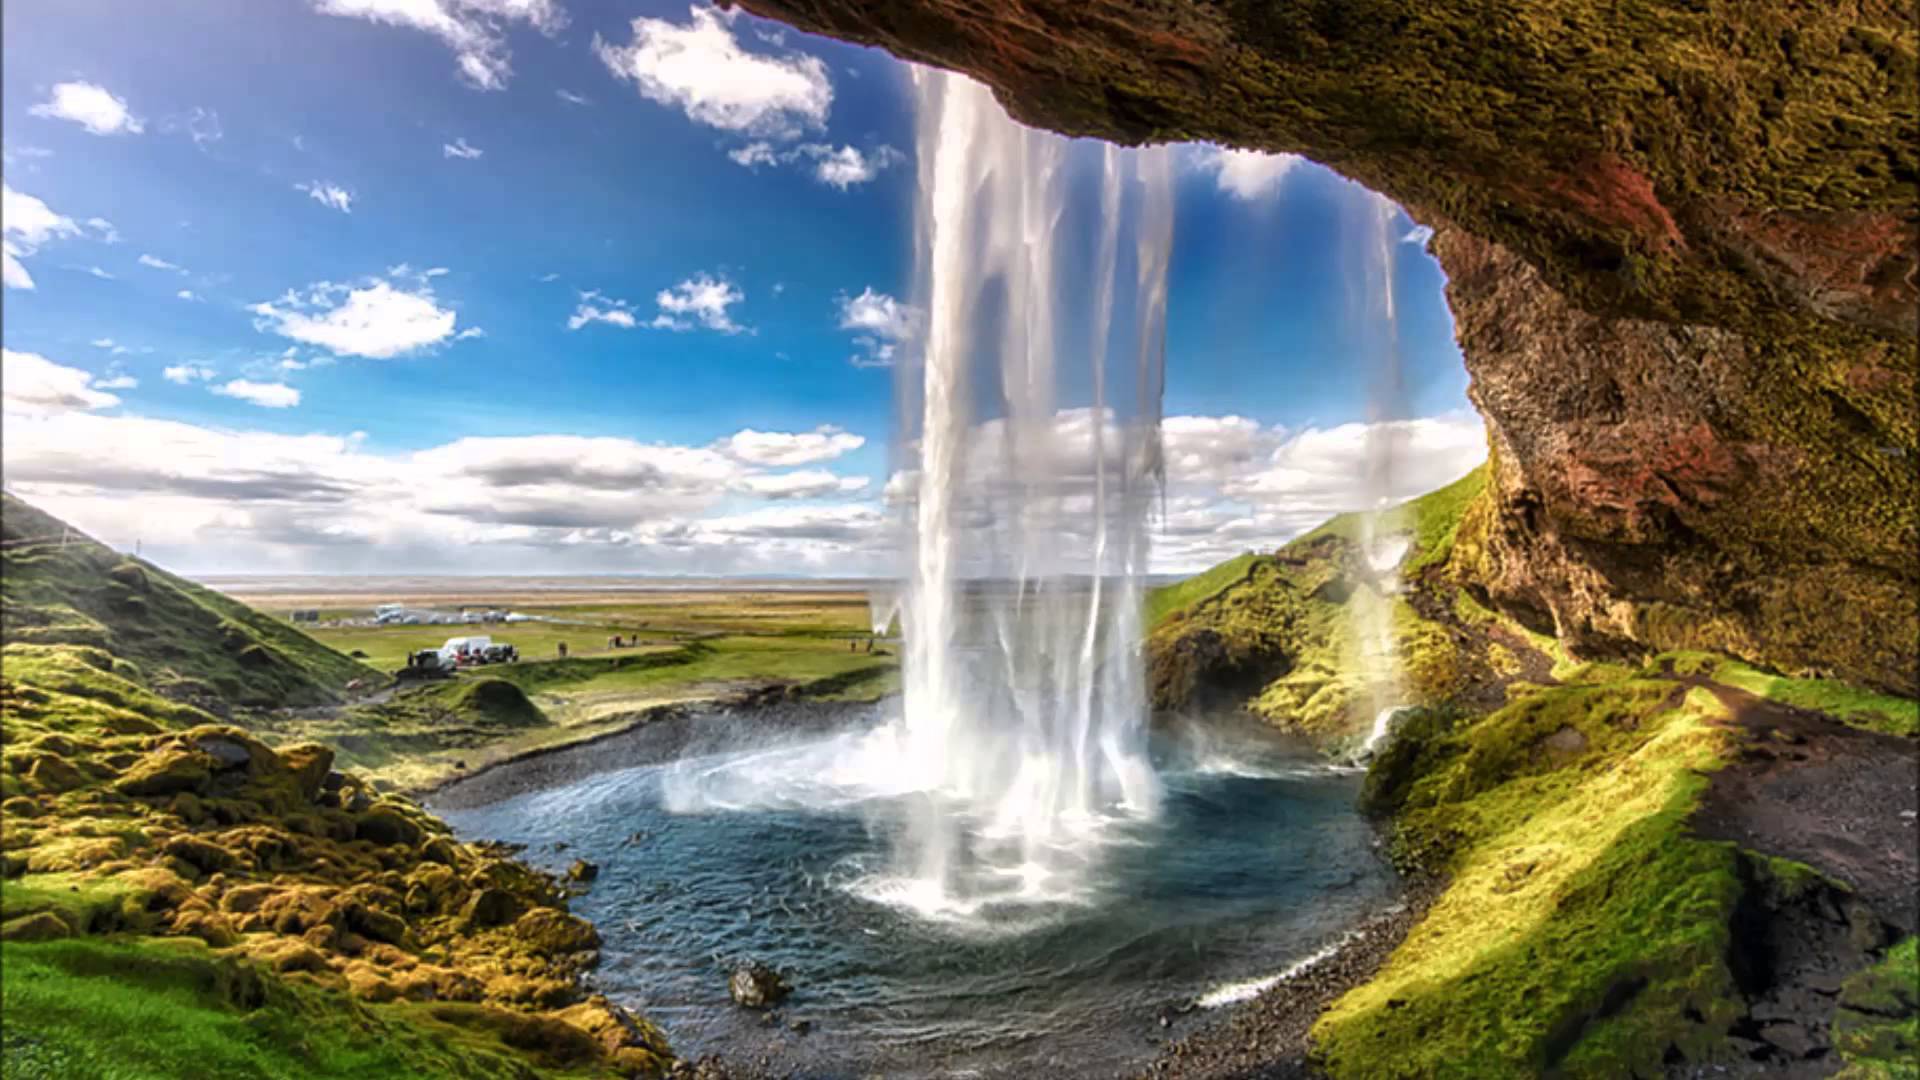 Seljalandsfoss Waterfall Is Located In The Southern Region Of Iceland And Is One Of The Most Popular Waterfalls And Natural Wonders In Iceland, Wallpaper13.com